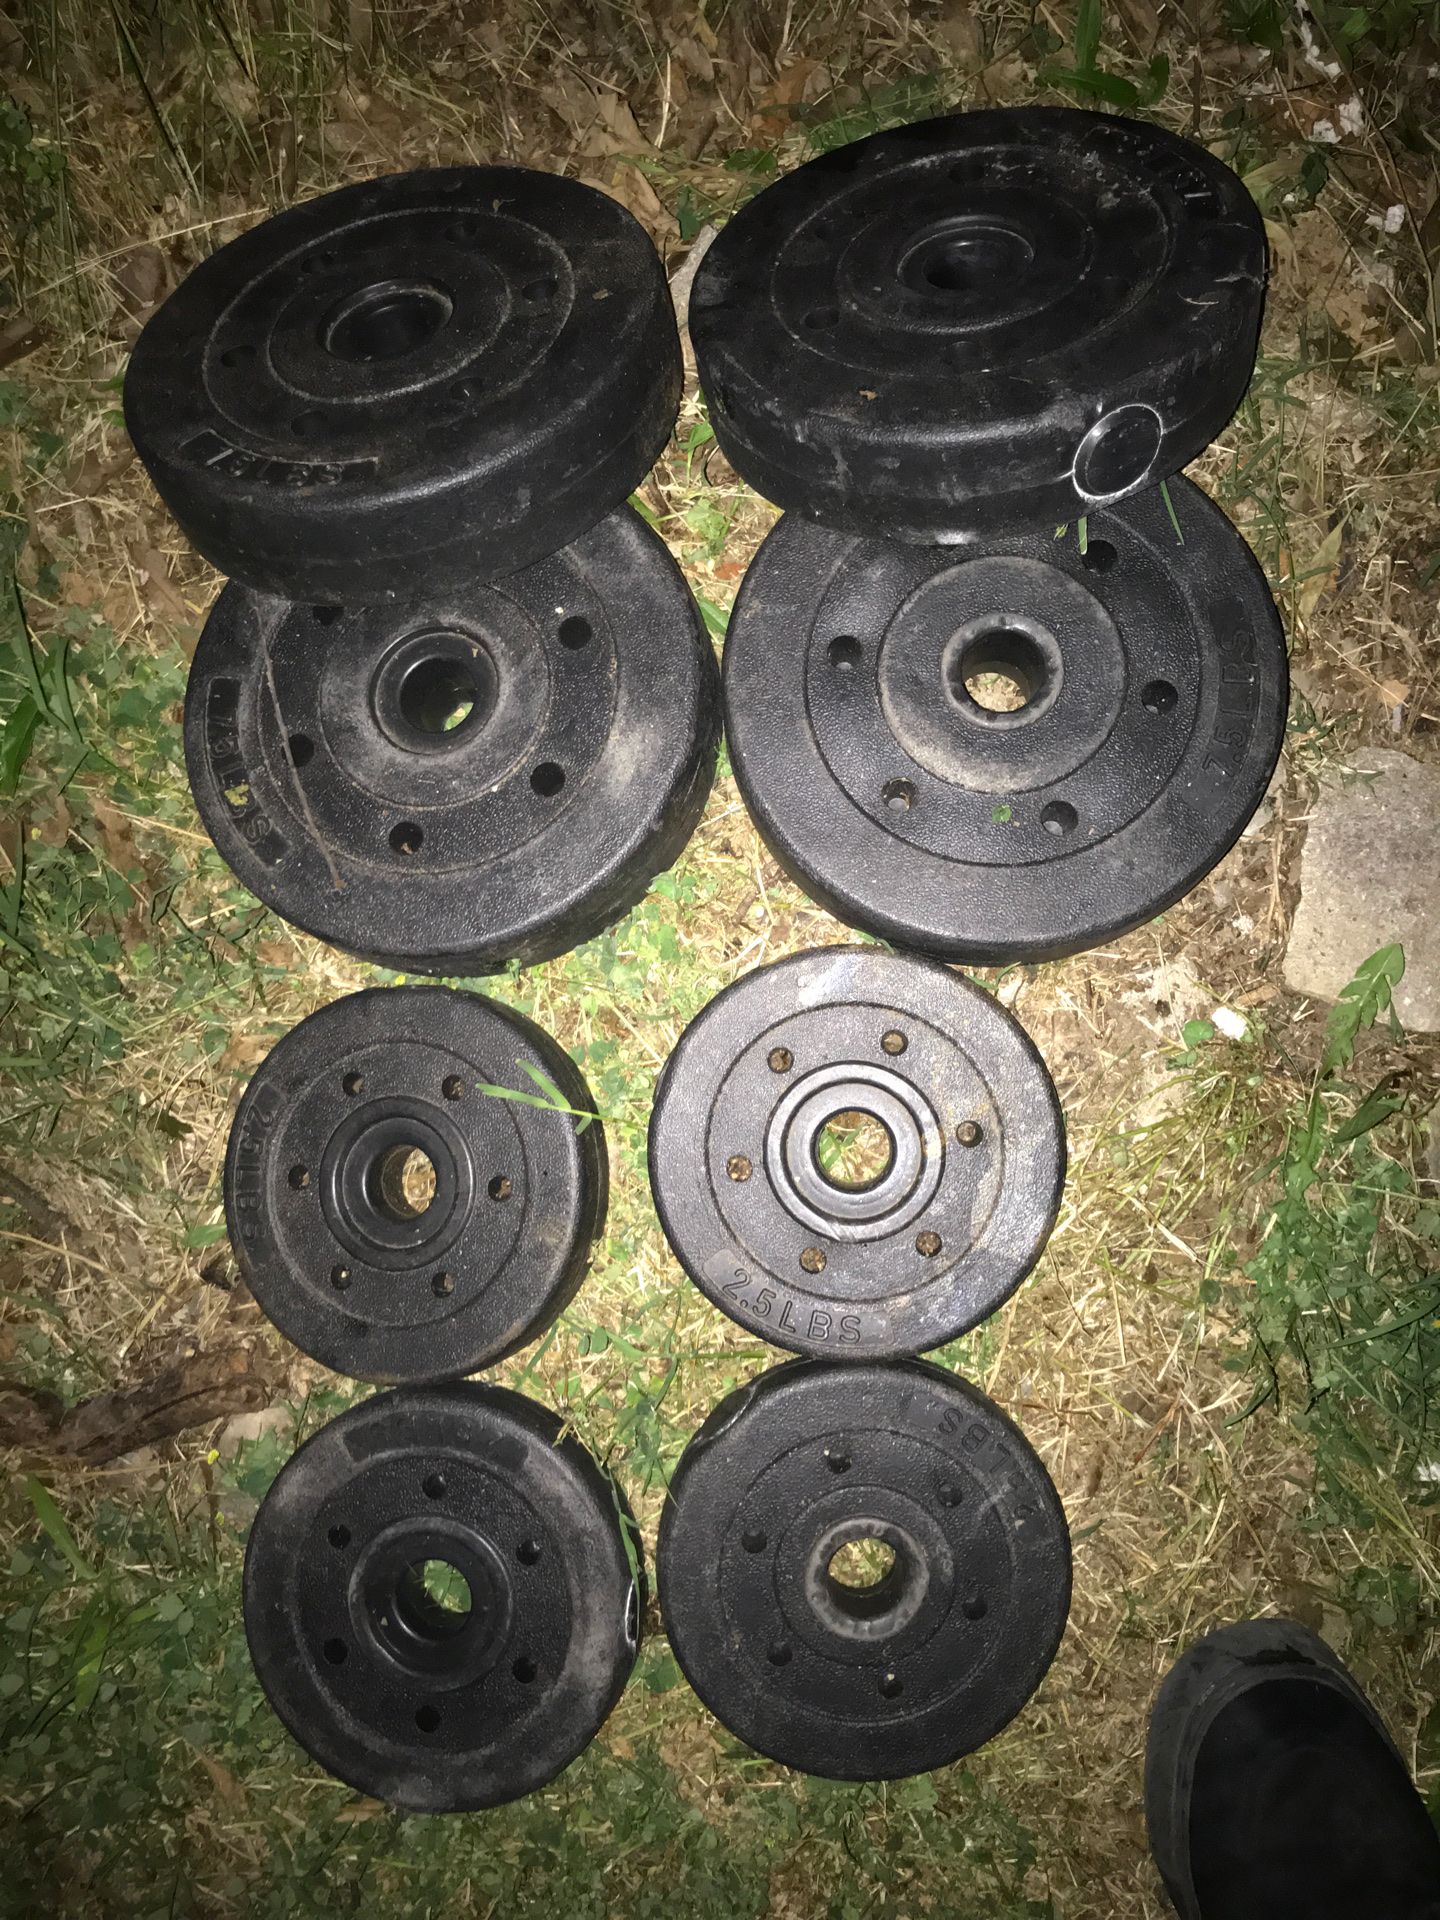 Free weights for dumbbells